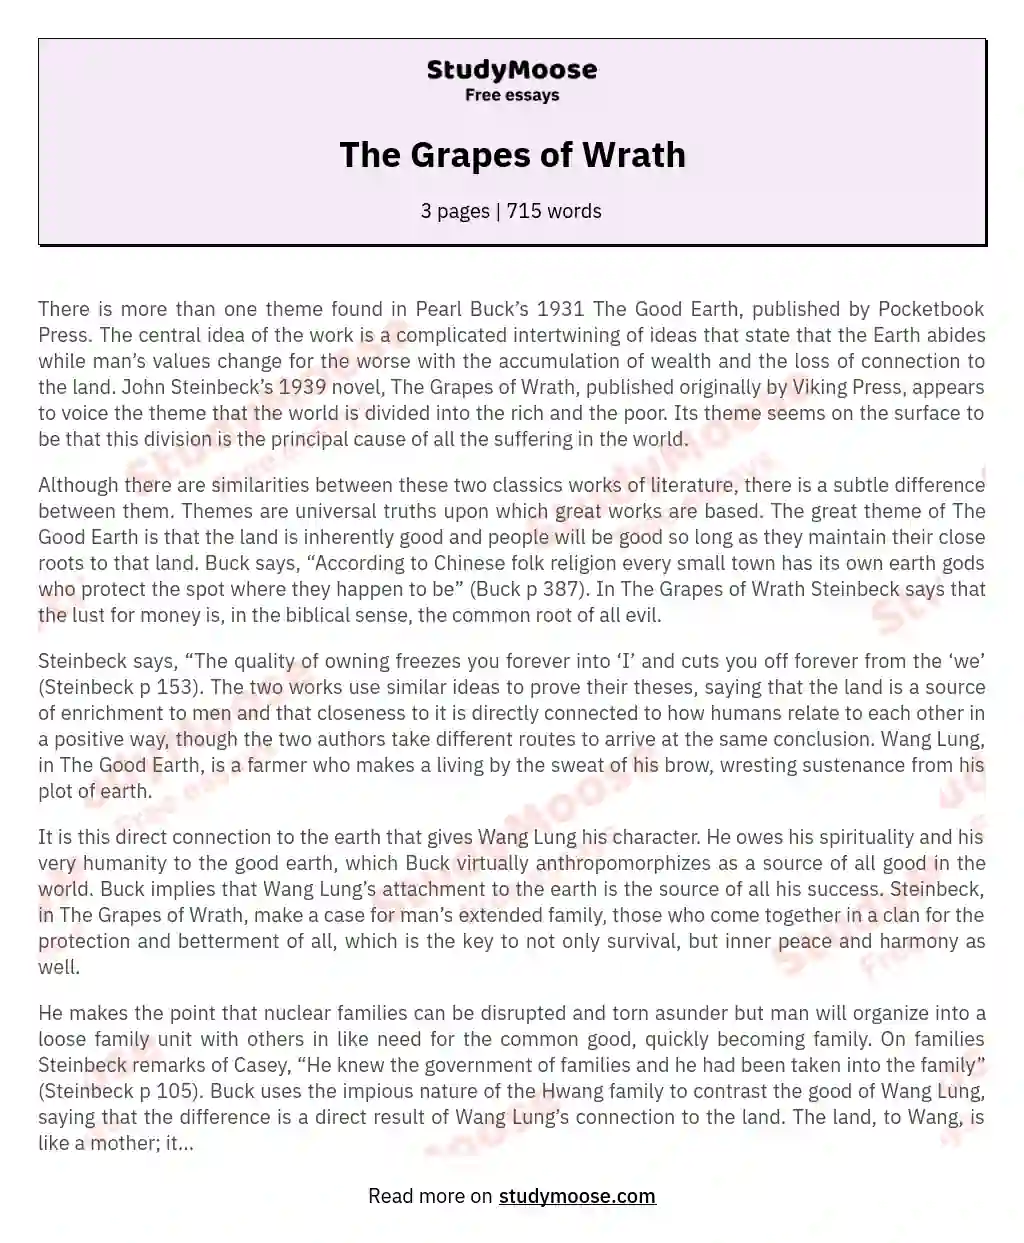 grapes of wrath essay questions